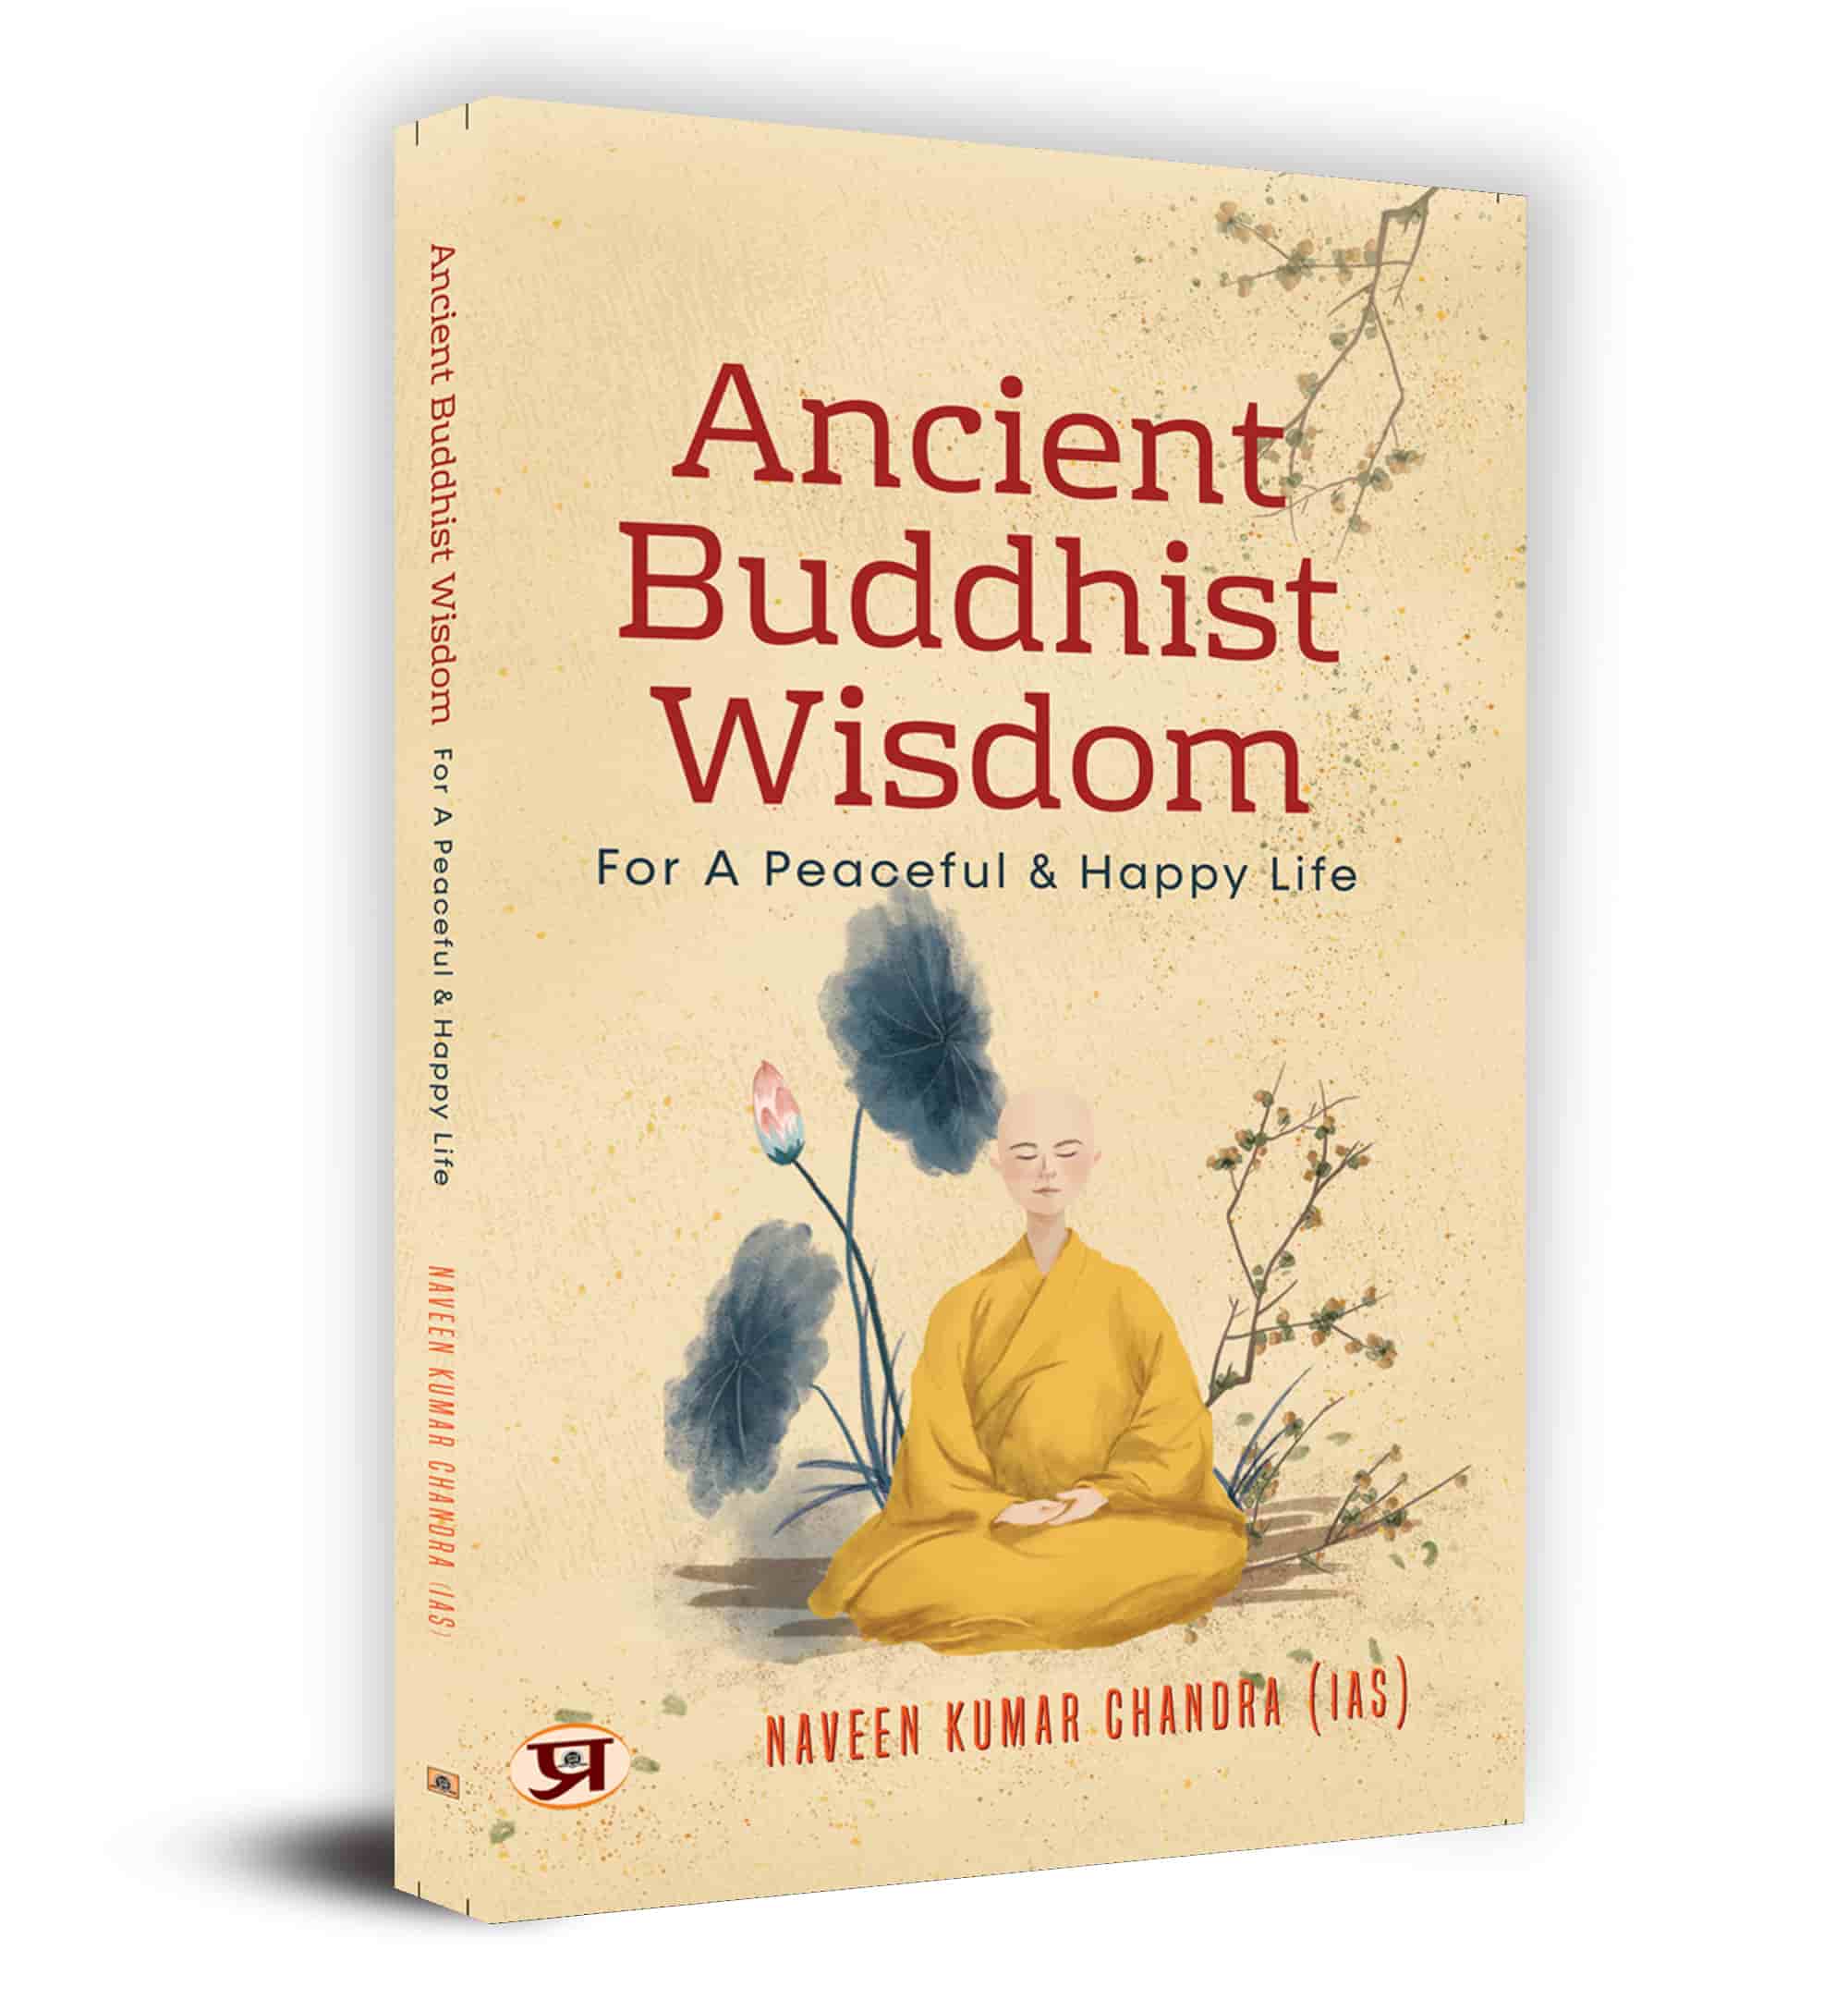 Ancient Buddhist Wisdom for A Peaceful & Happy Life by Naveen Kumar Chandra IAS (Book in English)